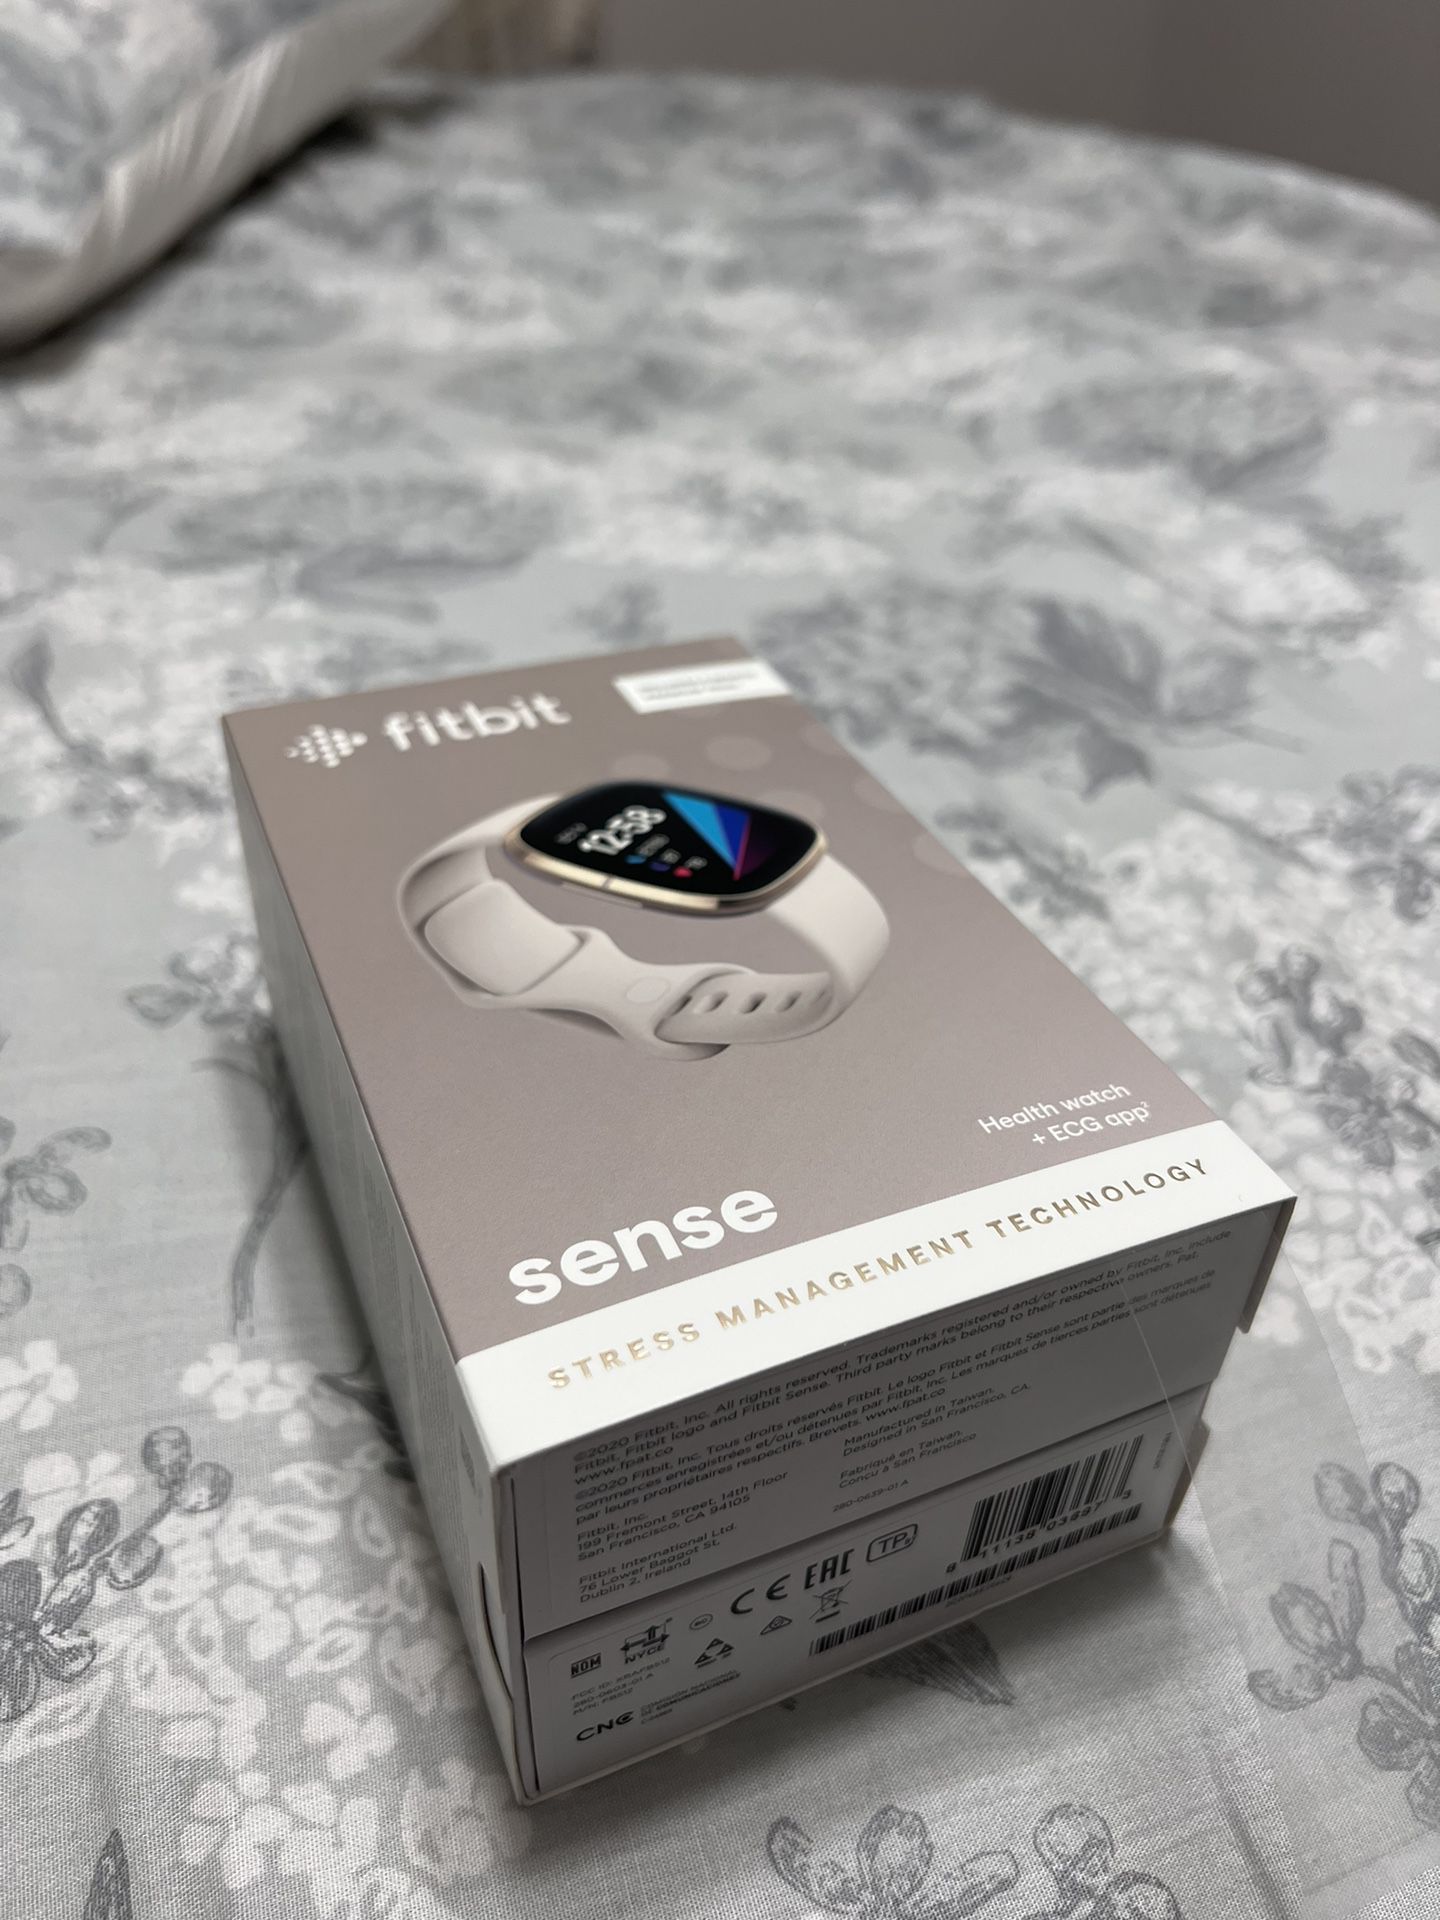 Fitbit Sense, Brand New, Never Used